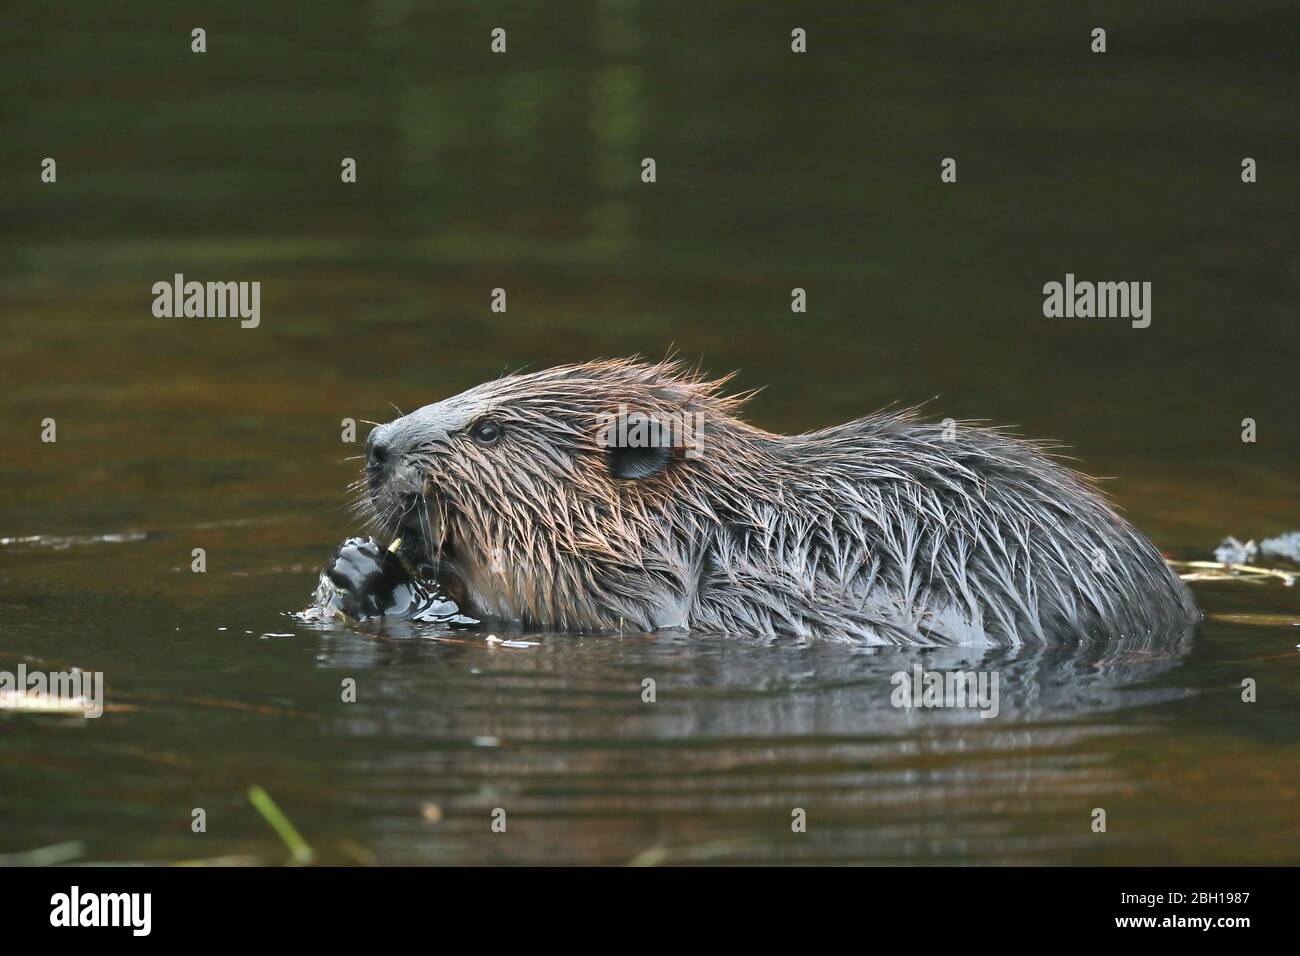 North American beaver, Canadian beaver (Castor canadensis), feeds on plants in water, Canada, Ontario, Algonquin Provincial Park Stock Photo